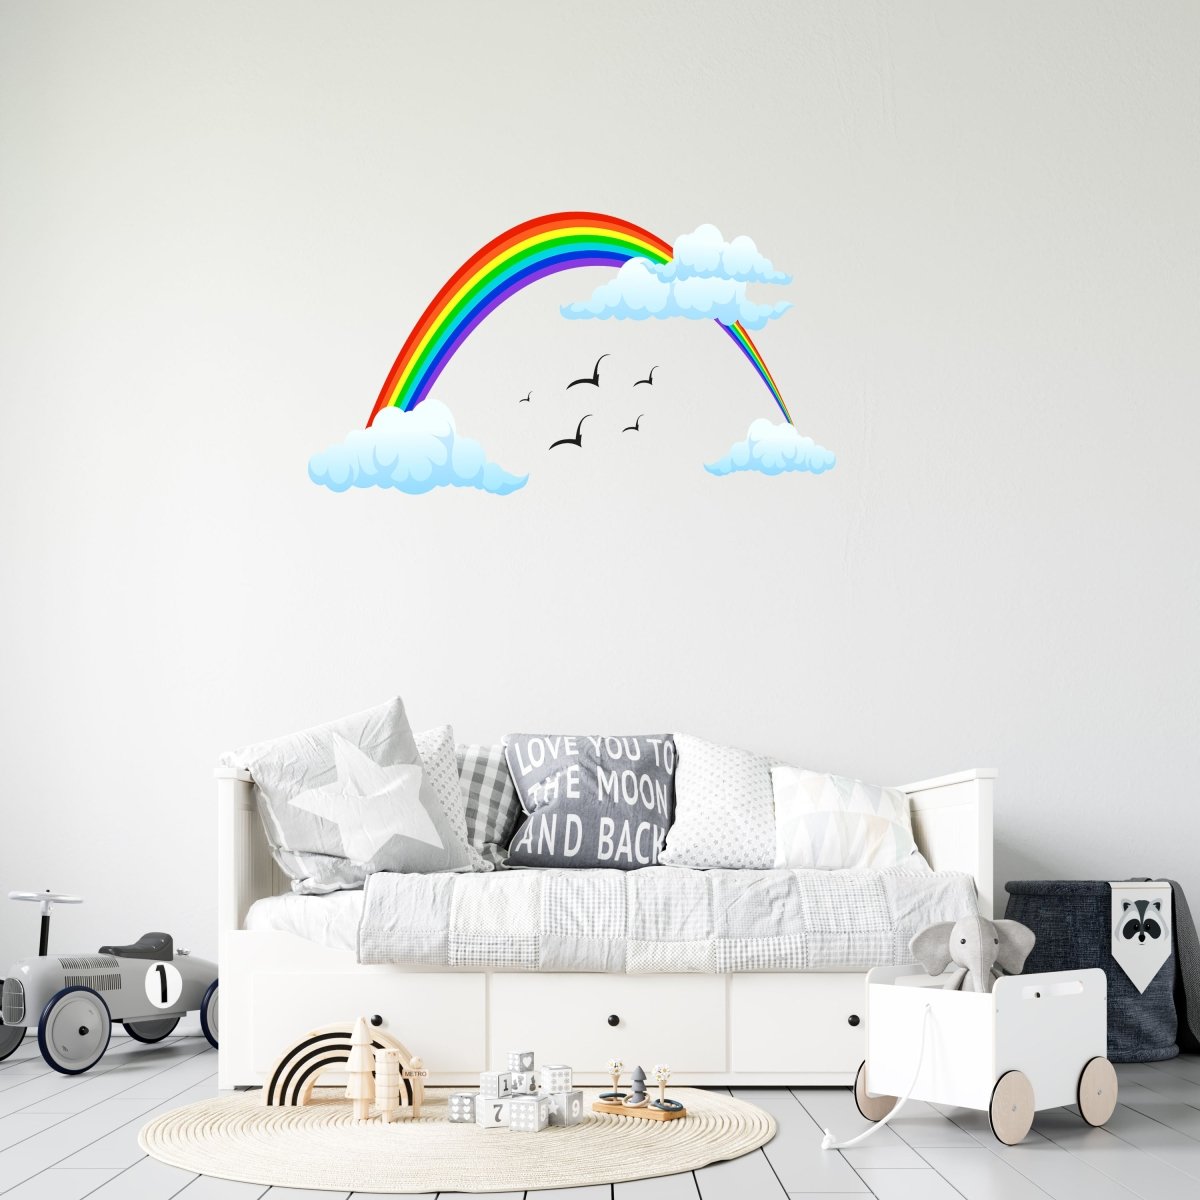 Discover wall stickers colorful rainbow, sky clouds, birds, WS00000059